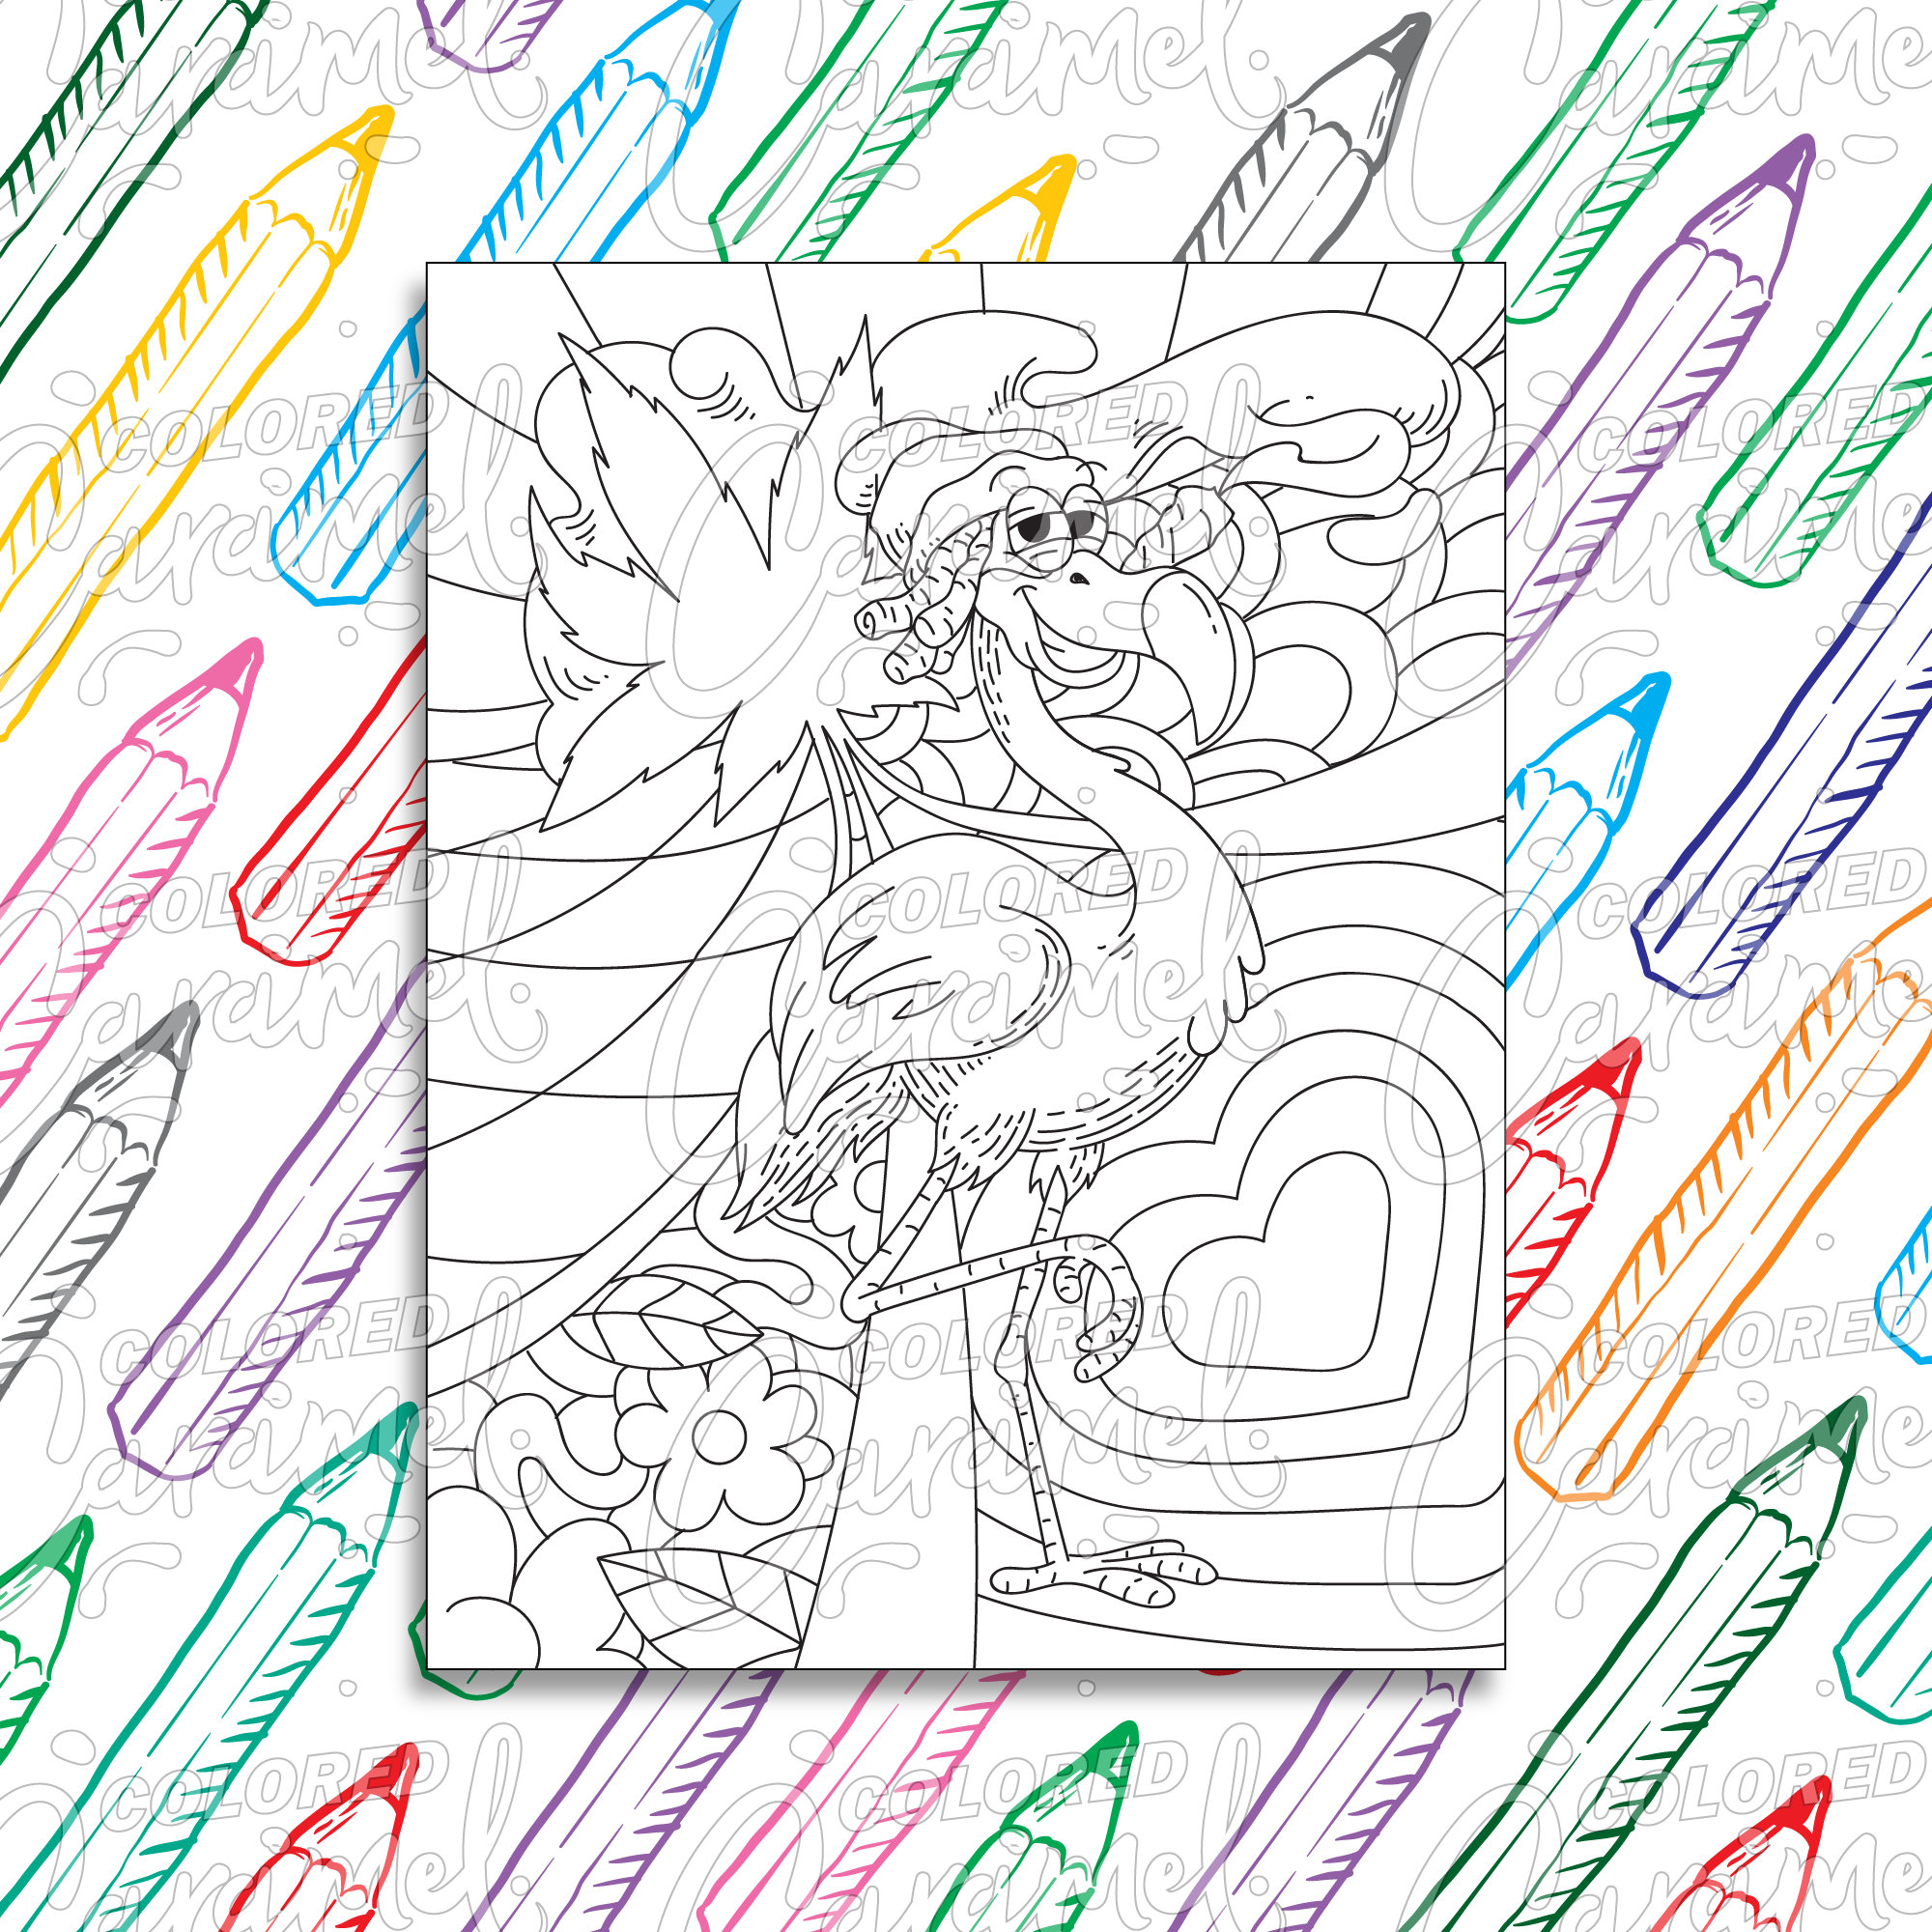 Stoner Coloring Page Digital Download PDF Trippy Funny and | Etsy